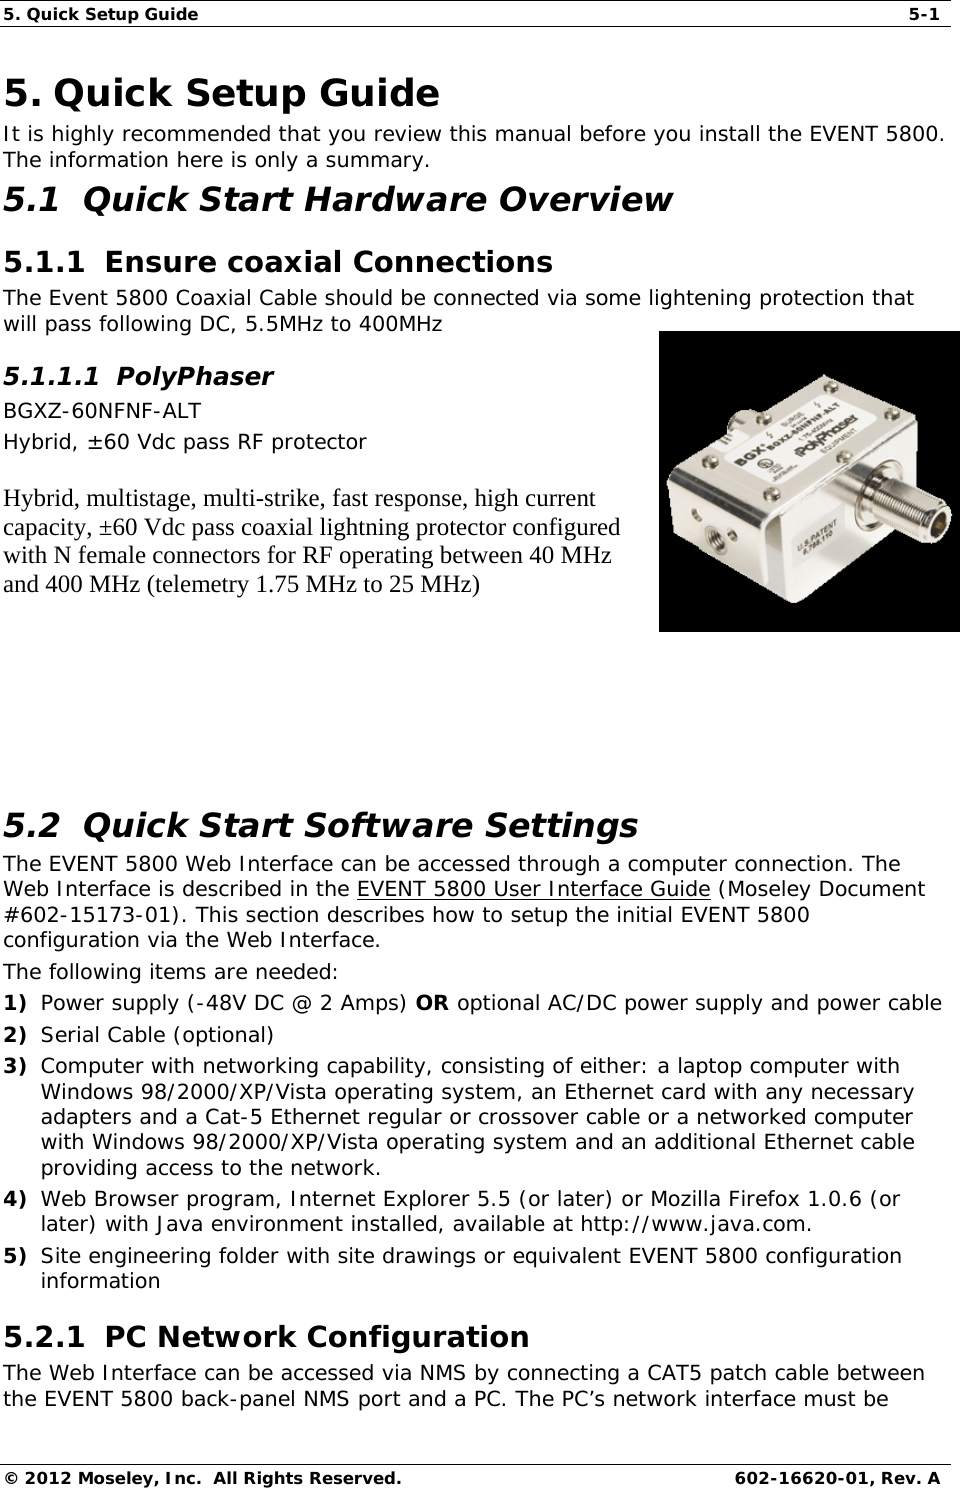 5. Quick Setup Guide  5-1 © 2012 Moseley, Inc.  All Rights Reserved.  602-16620-01, Rev. A 5. Quick Setup Guide It is highly recommended that you review this manual before you install the EVENT 5800.  The information here is only a summary. 5.1  Quick Start Hardware Overview  5.1.1  Ensure coaxial Connections The Event 5800 Coaxial Cable should be connected via some lightening protection that will pass following DC, 5.5MHz to 400MHz  5.1.1.1  PolyPhaser BGXZ-60NFNF-ALT  Hybrid, ±60 Vdc pass RF protector Hybrid, multistage, multi-strike, fast response, high current capacity, ±60 Vdc pass coaxial lightning protector configured with N female connectors for RF operating between 40 MHz and 400 MHz (telemetry 1.75 MHz to 25 MHz)            5.2  Quick Start Software Settings  The EVENT 5800 Web Interface can be accessed through a computer connection. The Web Interface is described in the EVENT 5800 User Interface Guide (Moseley Document #602-15173-01). This section describes how to setup the initial EVENT 5800 configuration via the Web Interface. The following items are needed: 1) Power supply (-48V DC @ 2 Amps) OR optional AC/DC power supply and power cable  2) Serial Cable (optional) 3) Computer with networking capability, consisting of either: a laptop computer with Windows 98/2000/XP/Vista operating system, an Ethernet card with any necessary adapters and a Cat-5 Ethernet regular or crossover cable or a networked computer with Windows 98/2000/XP/Vista operating system and an additional Ethernet cable providing access to the network. 4) Web Browser program, Internet Explorer 5.5 (or later) or Mozilla Firefox 1.0.6 (or later) with Java environment installed, available at http://www.java.com. 5) Site engineering folder with site drawings or equivalent EVENT 5800 configuration information 5.2.1  PC Network Configuration  The Web Interface can be accessed via NMS by connecting a CAT5 patch cable between the EVENT 5800 back-panel NMS port and a PC. The PC’s network interface must be 